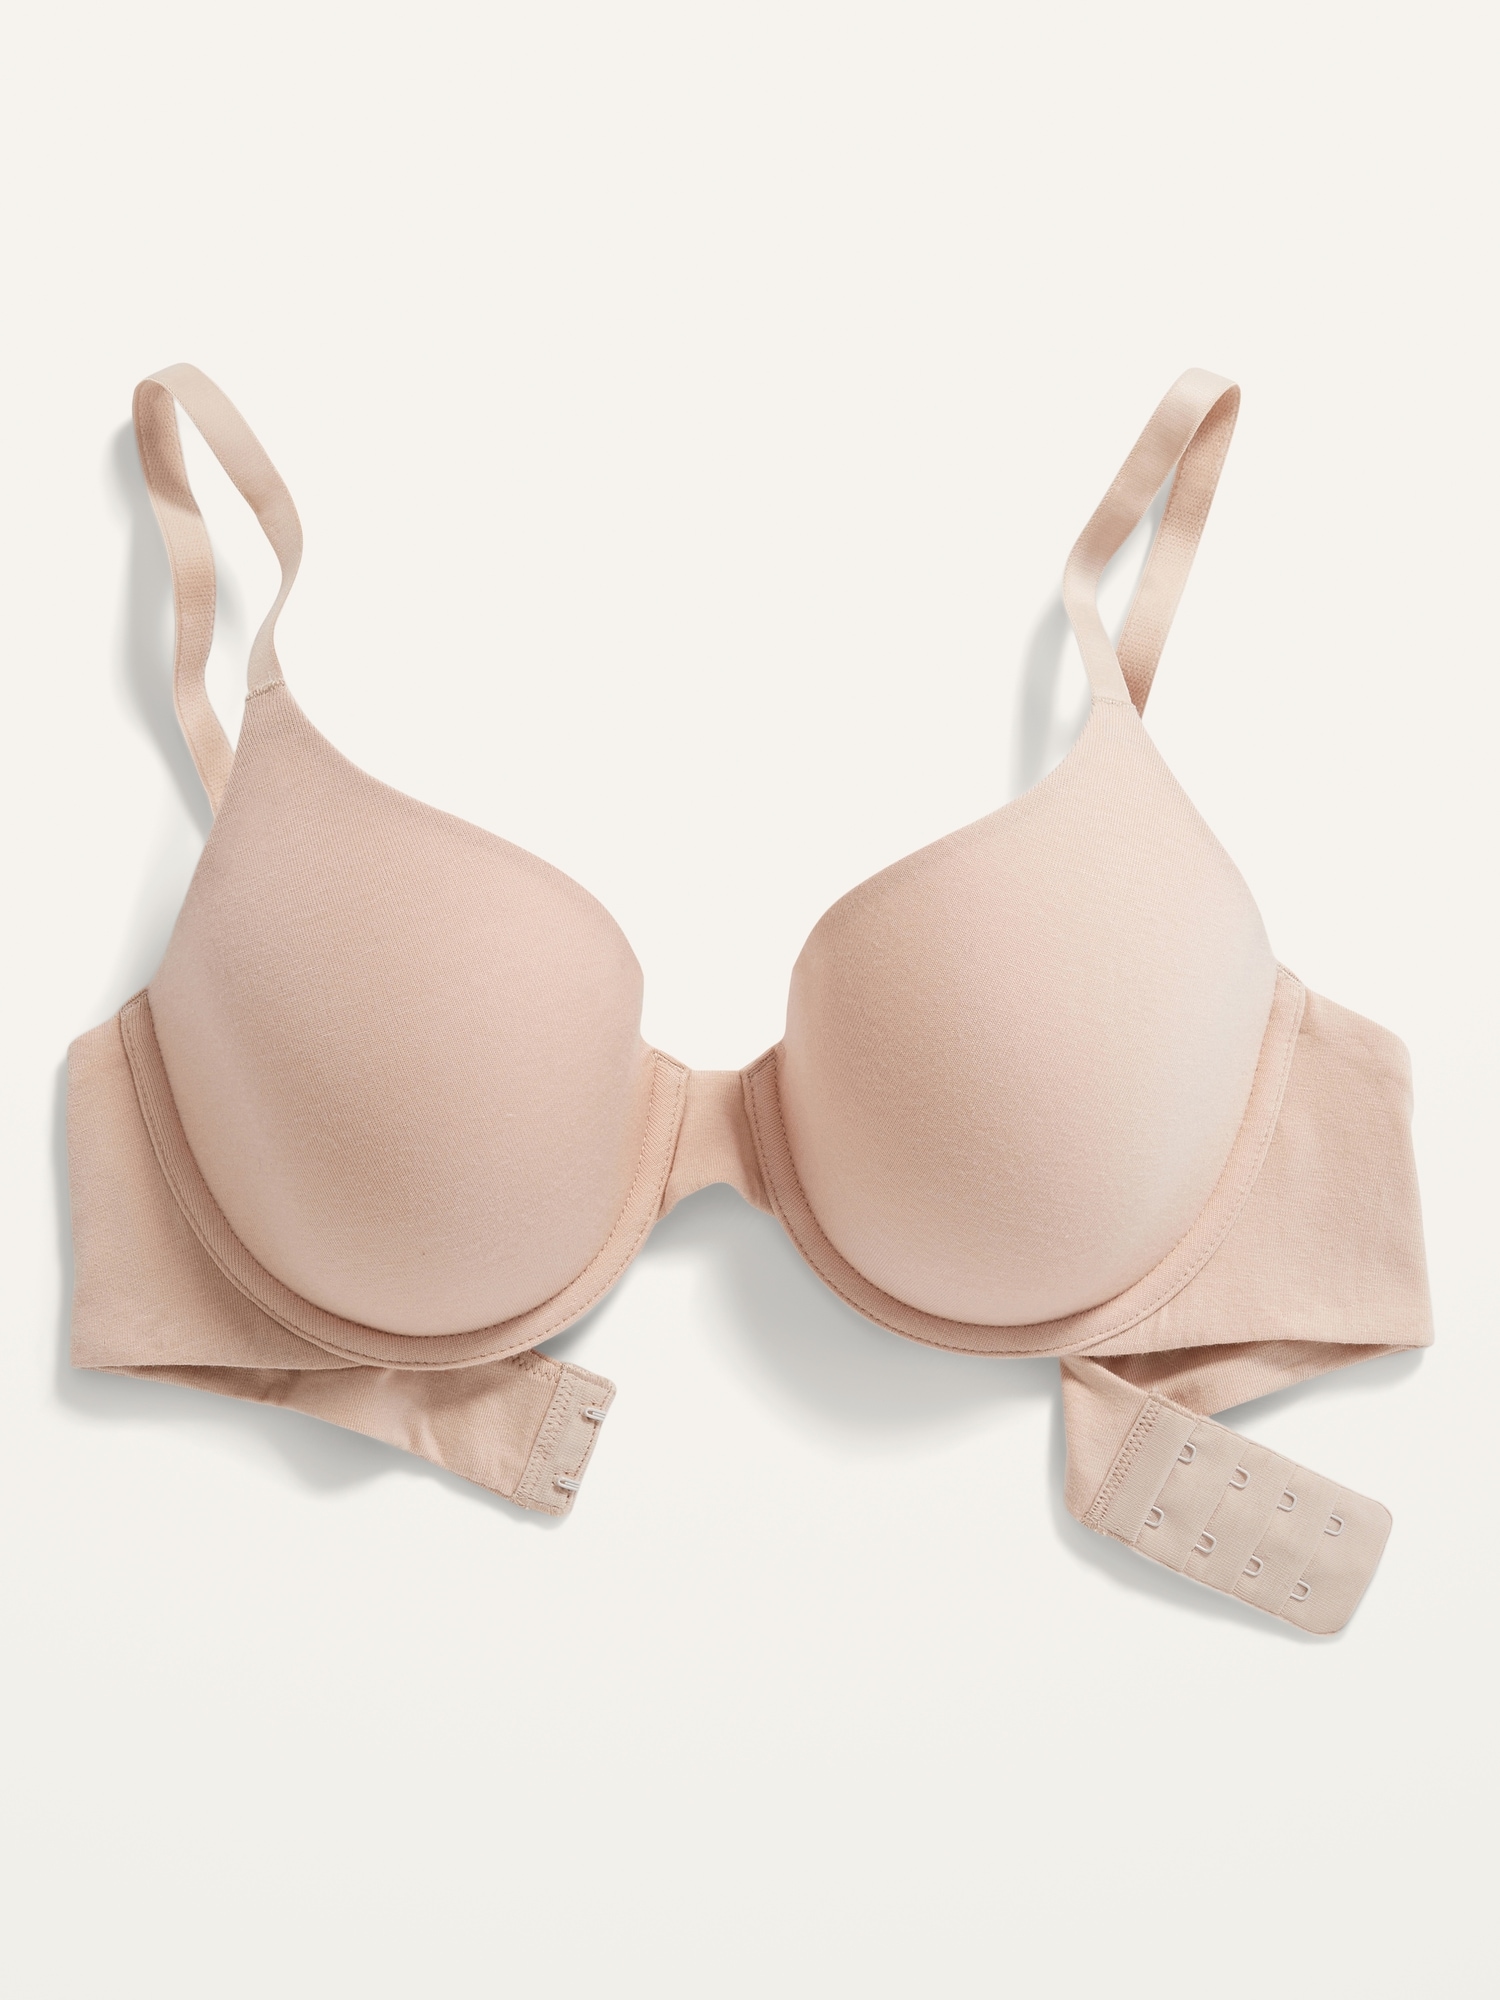 Buy Aerie Real Sunnie Full Coverage Strappy Bra online